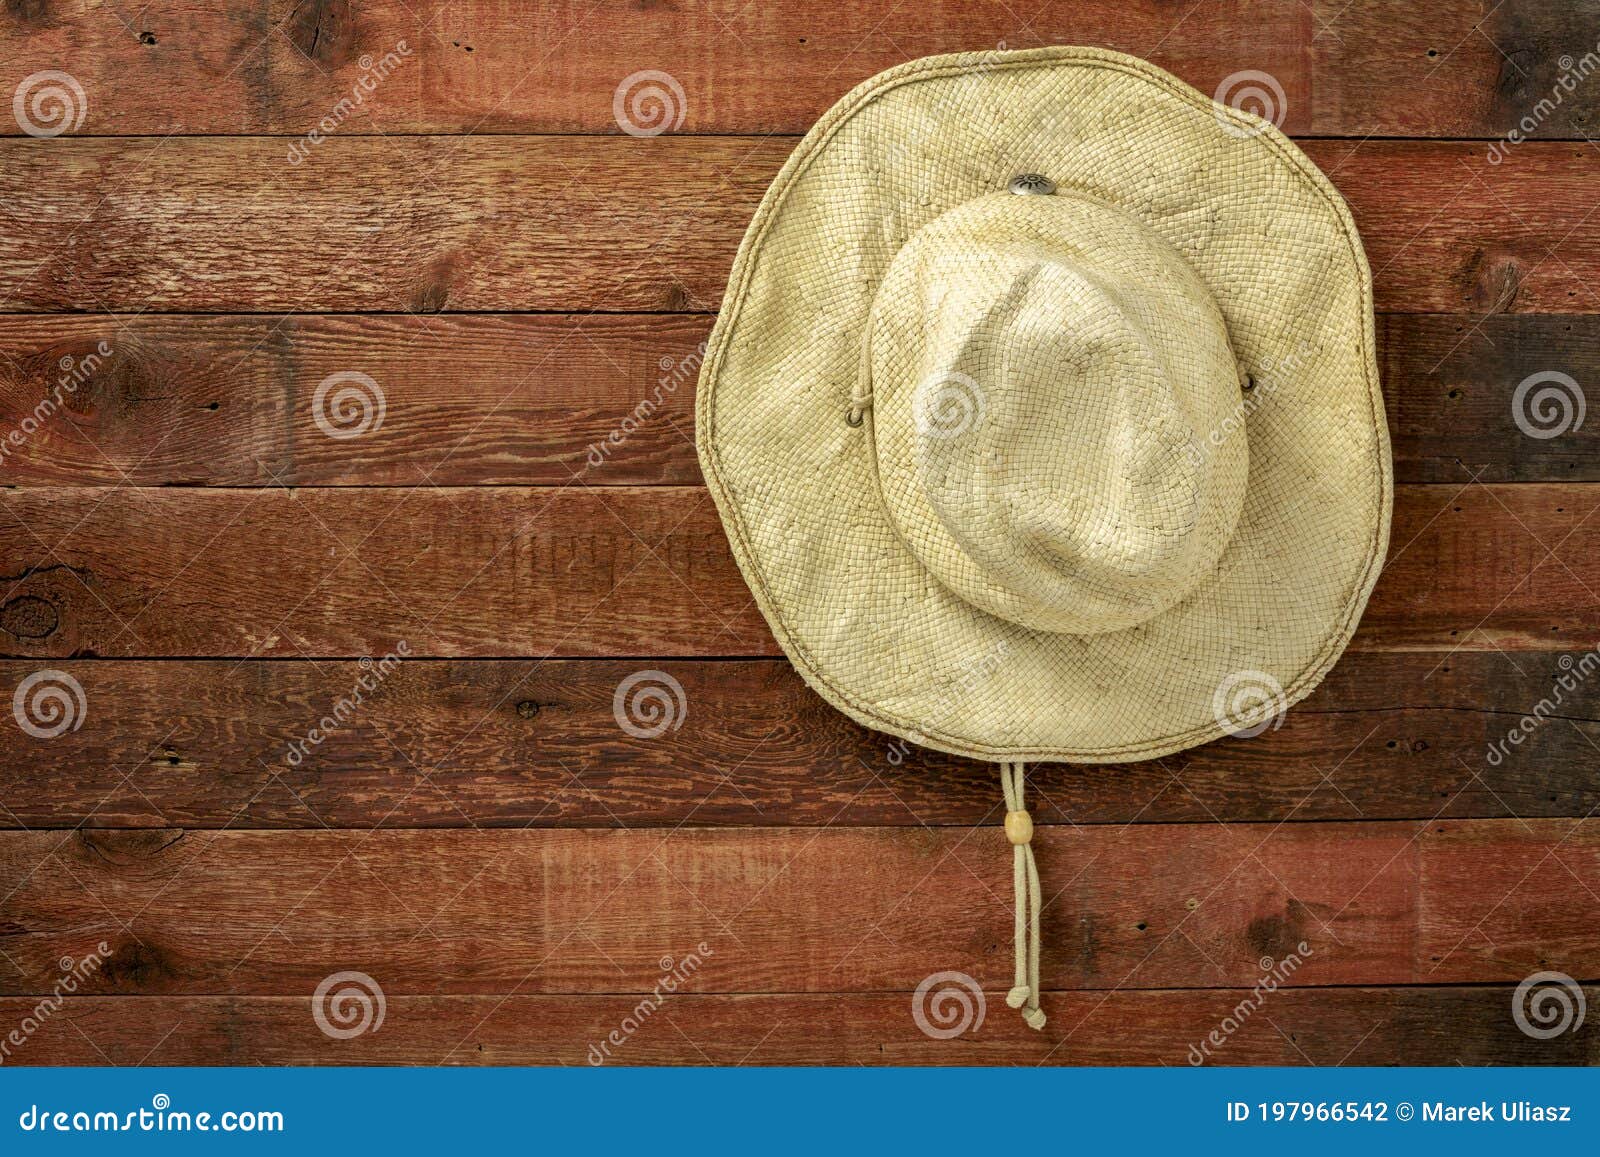 Straw Cowboy Hat Hanging on Weathered Barn Wall Stock Photo - Image of ...